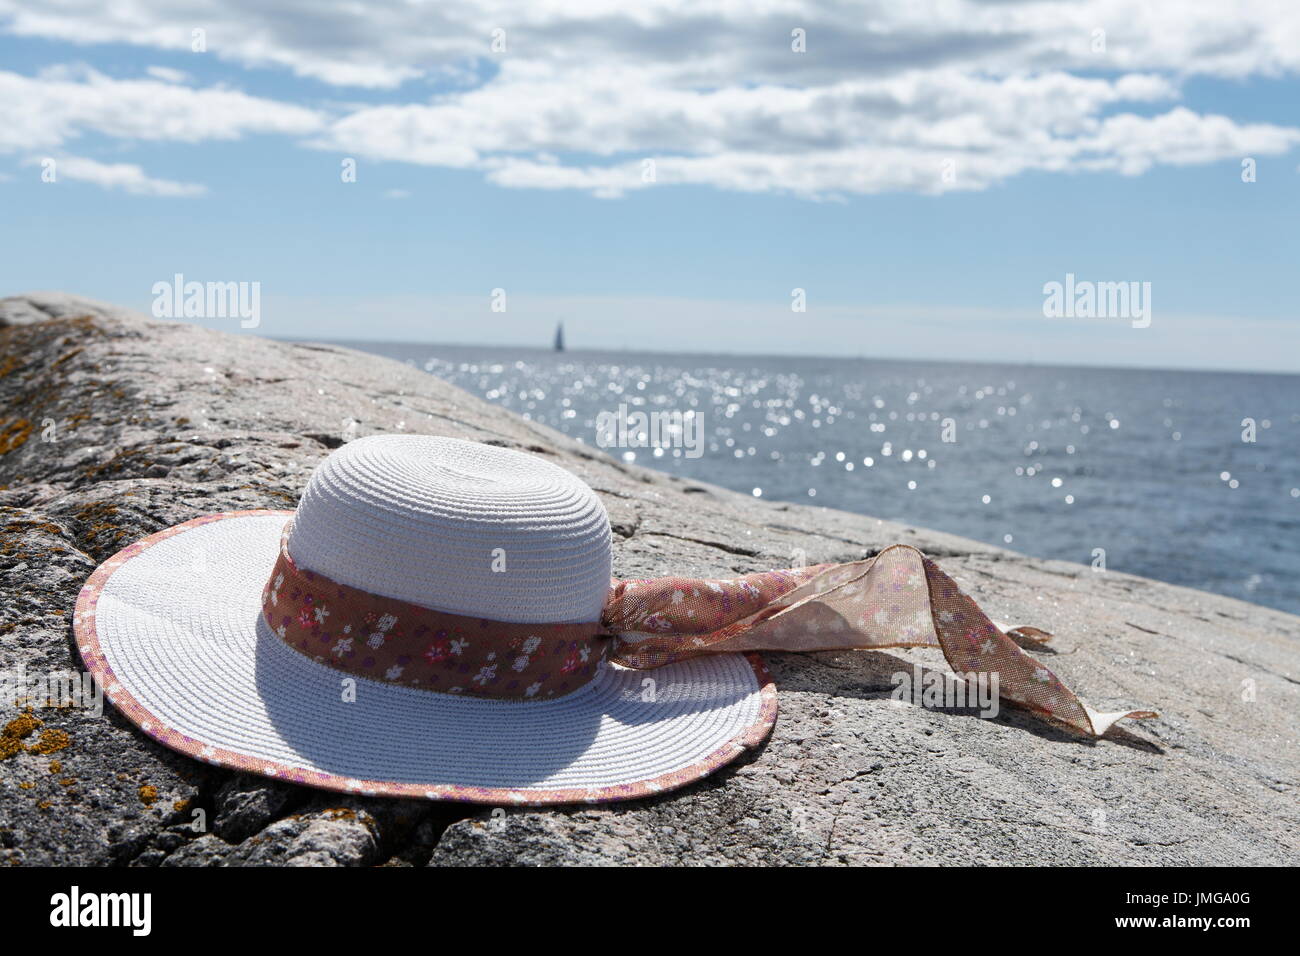 Relaxing in the summer sun with the ocean in the background. Sails in the horizon. Summer hat close by. Stock Photo